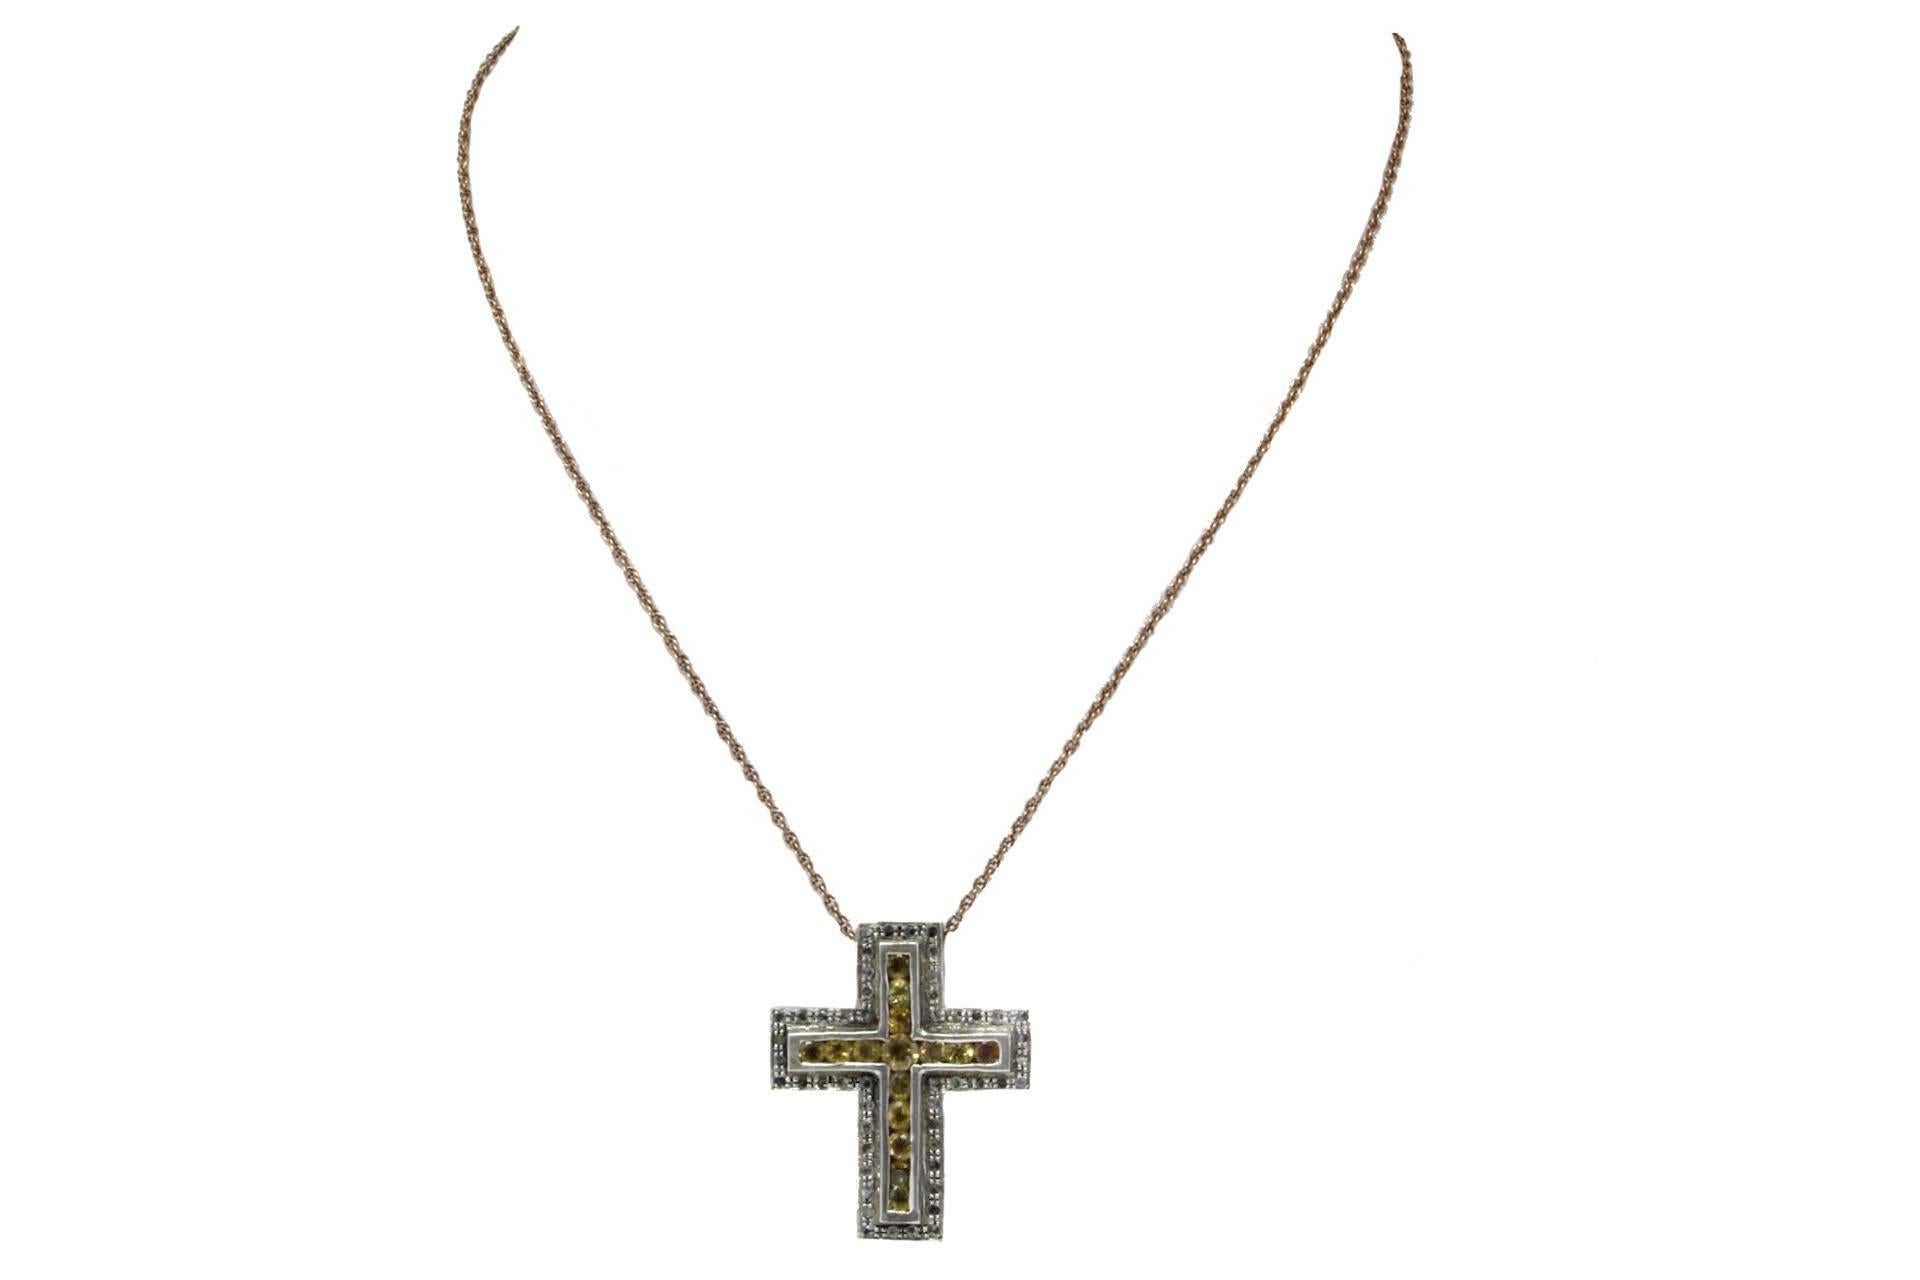 Pendant cross necklace and chain in 14kt rose gold and silver embellished with diamonds and topazes.

tot weight 11.3gr
r.f.   cge